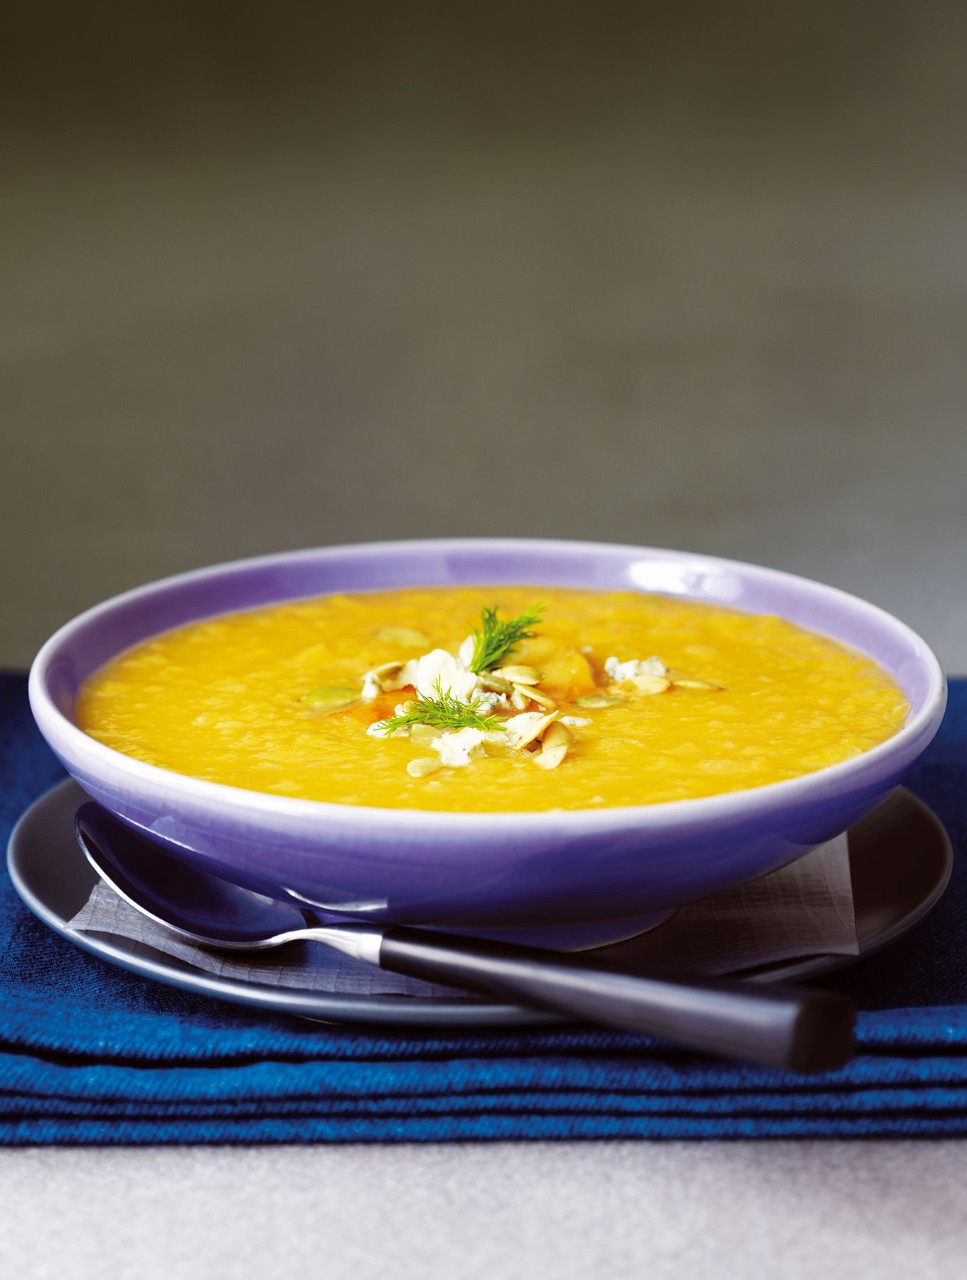 Squash and Fennel Soup with Cider and Caramelized Apple